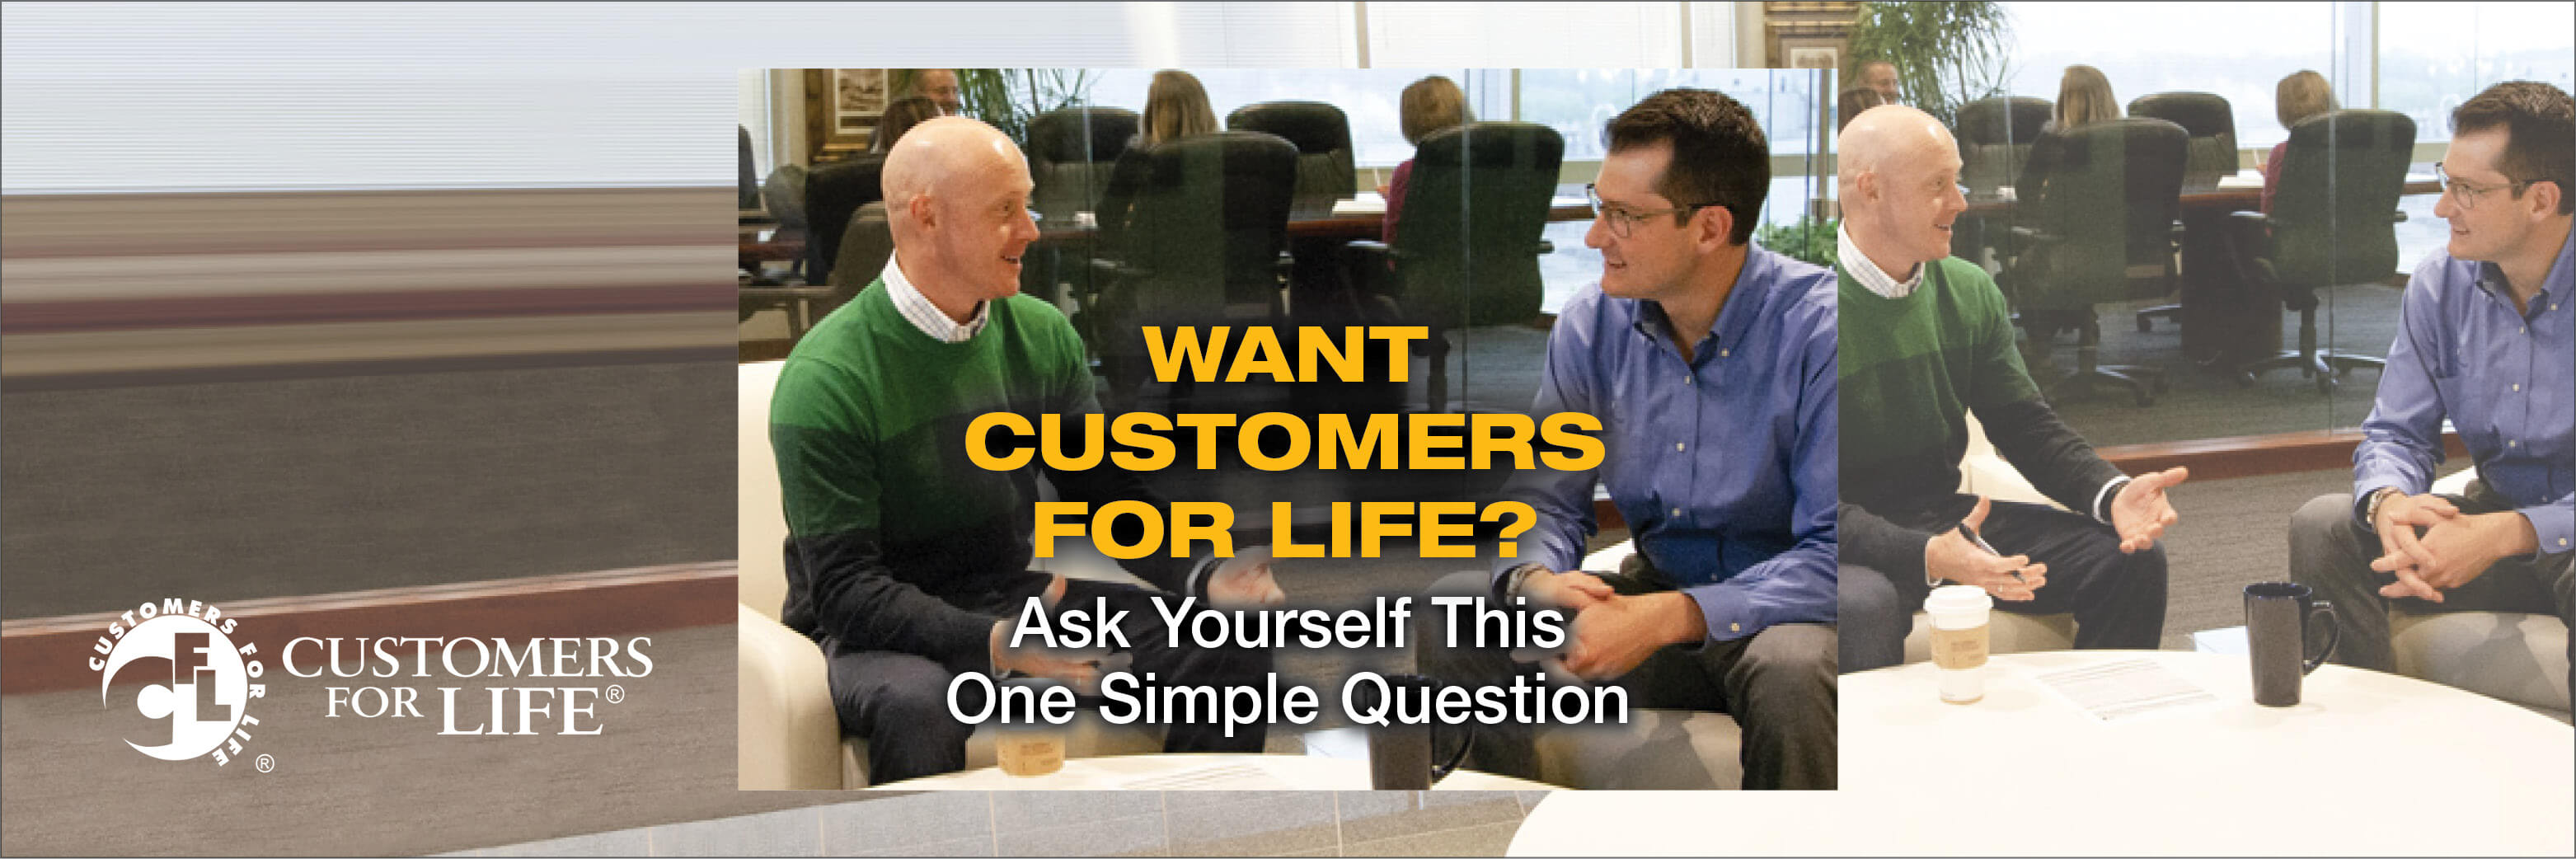 Want Customers for Life®? Ask Yourself this One Simple Question